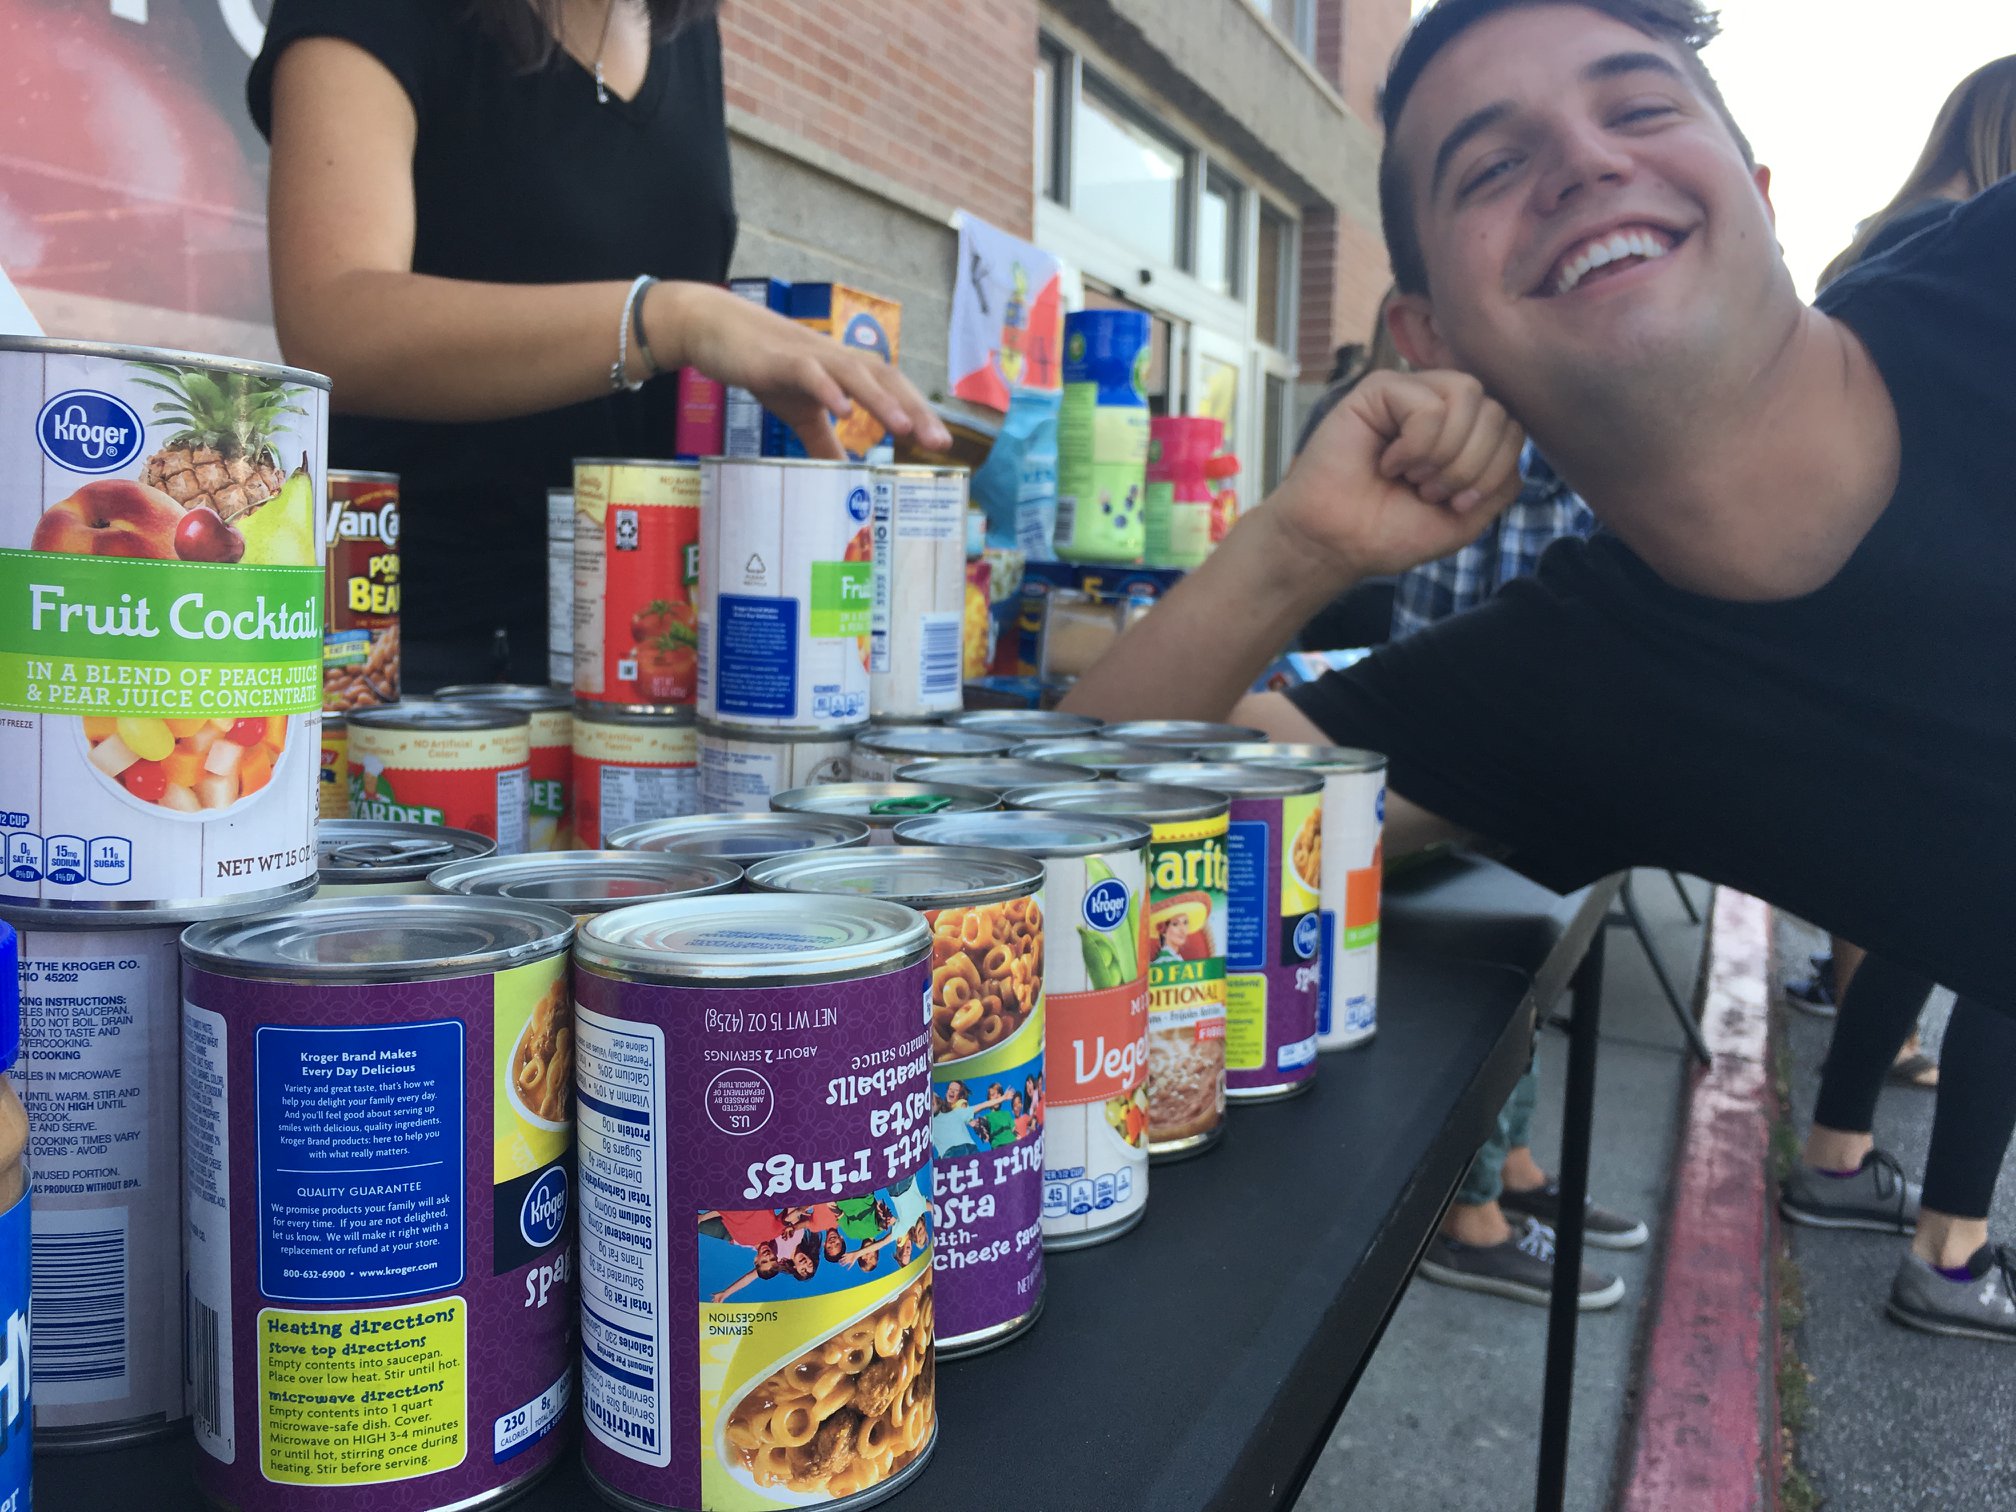 Kappa Psi Epsilon Chi Hosts Drive 2018 collecting cans